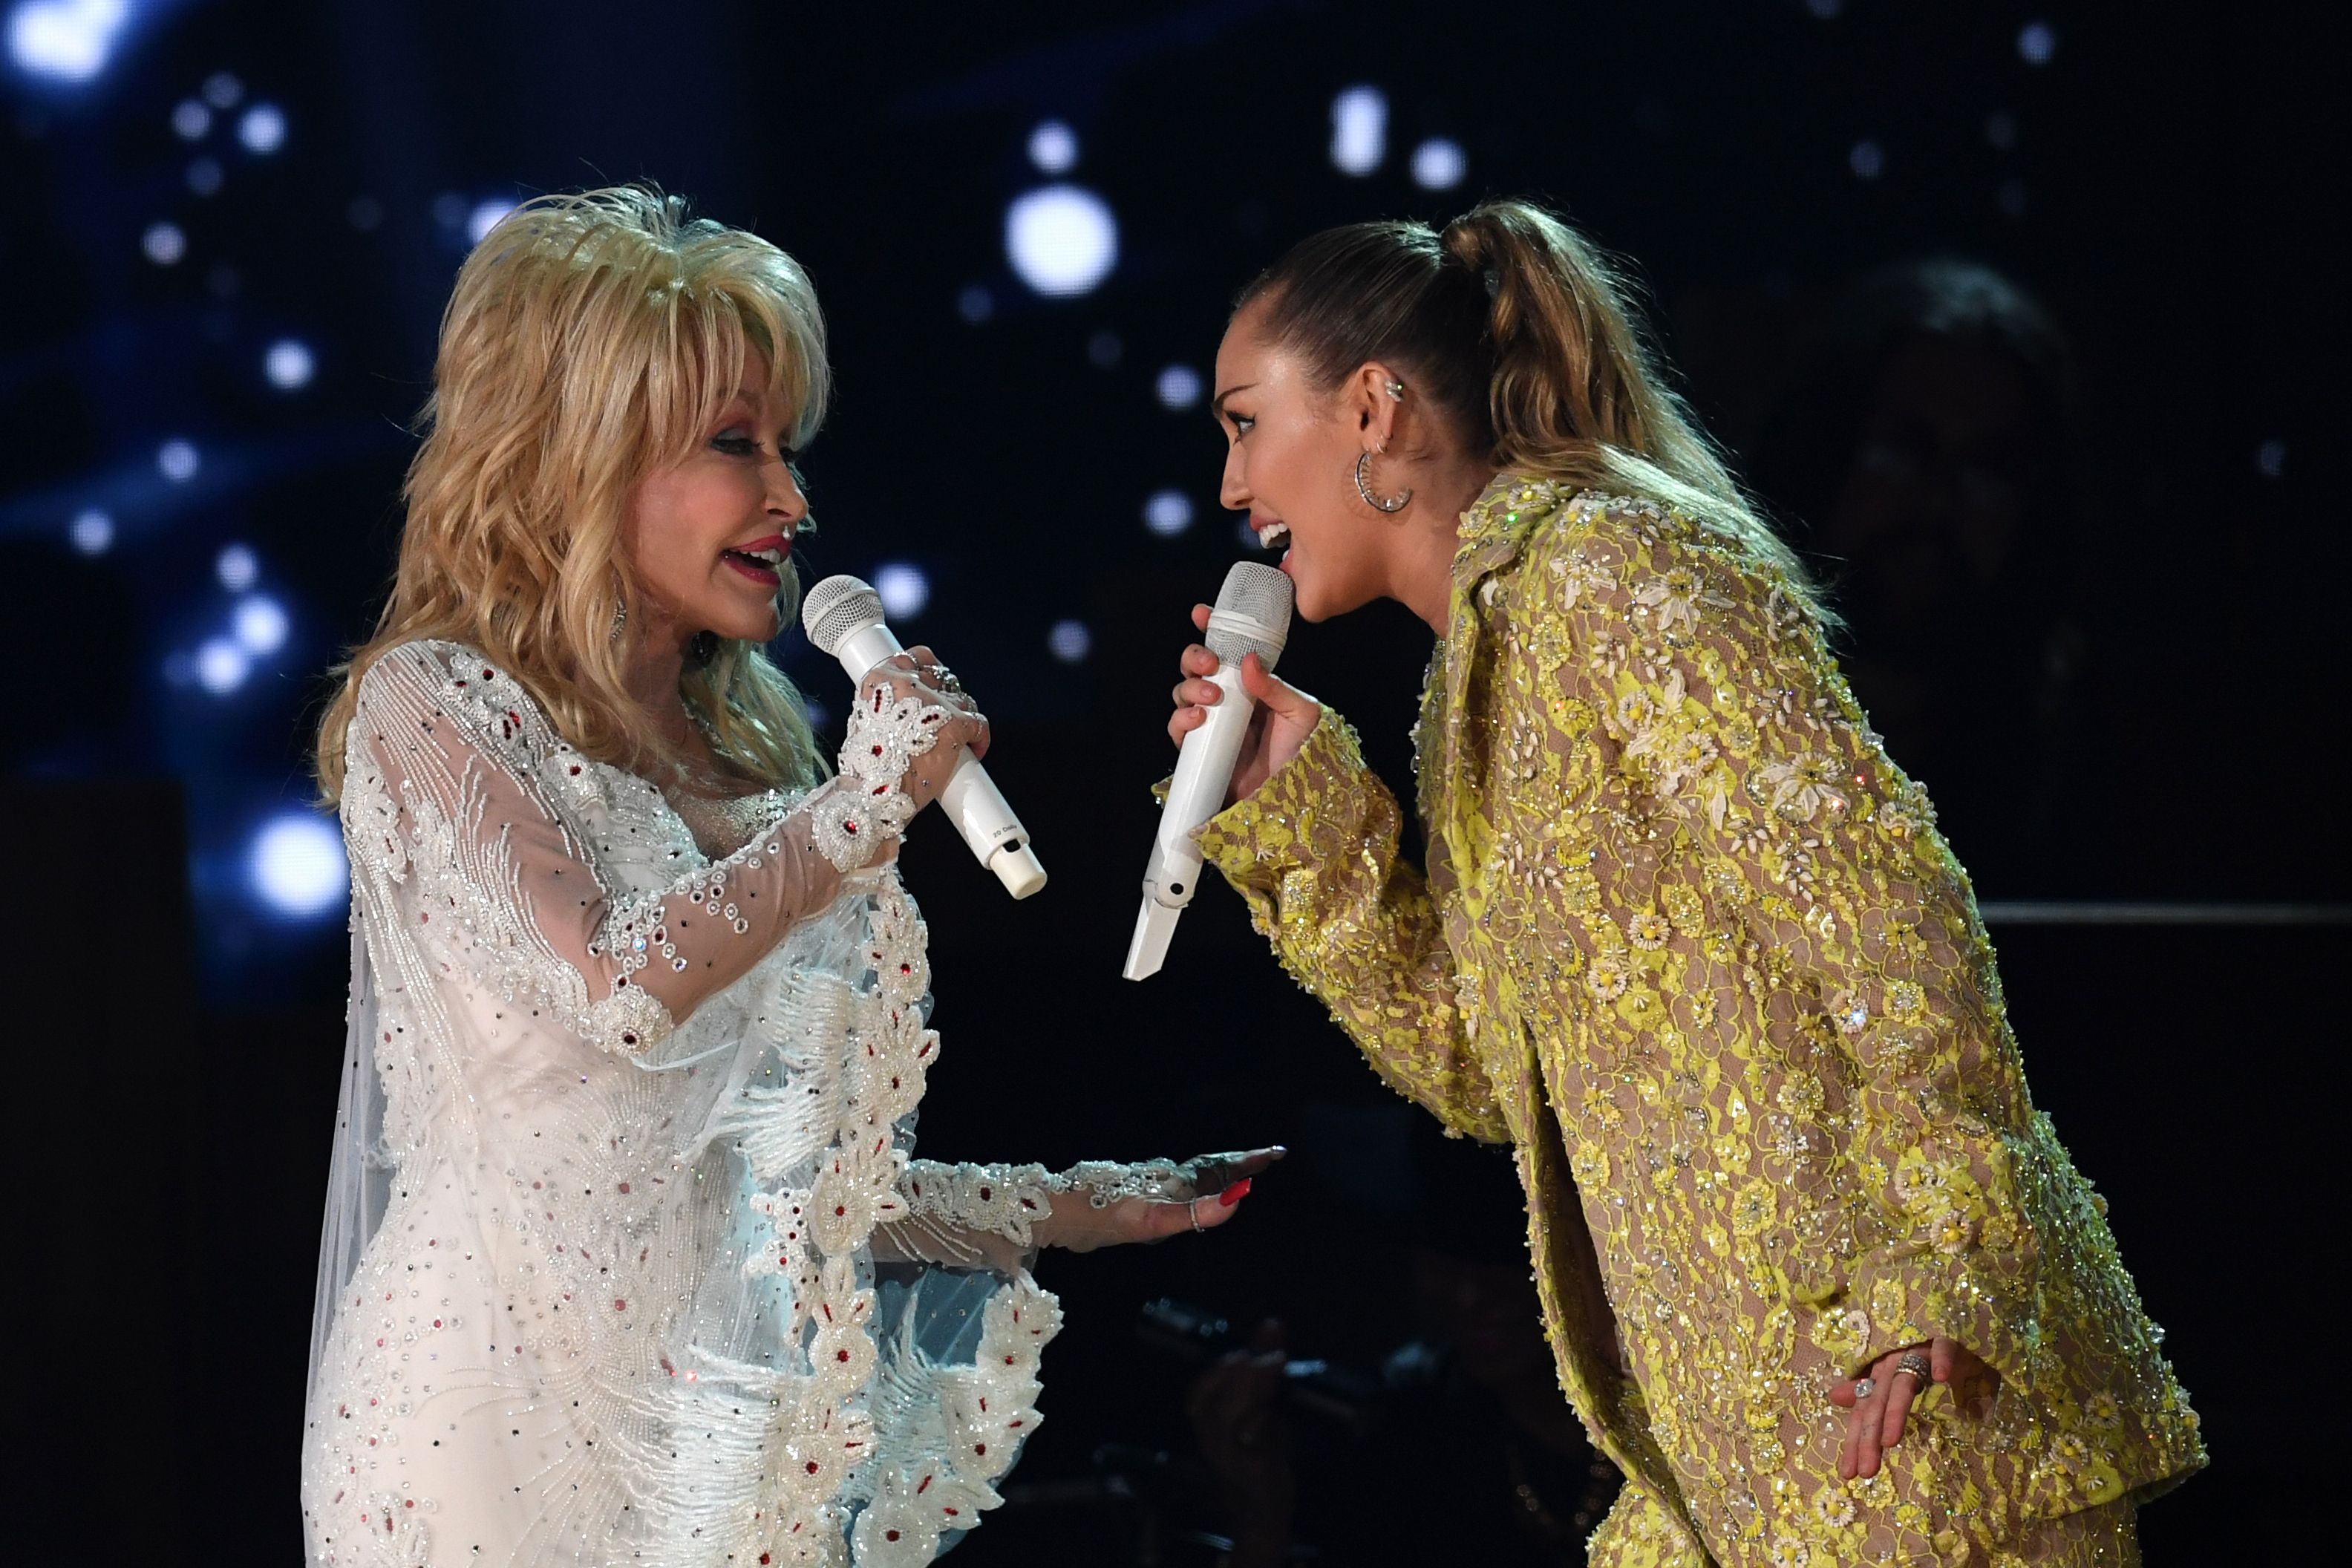 Miley Cyrus performing with Dolly Parton 